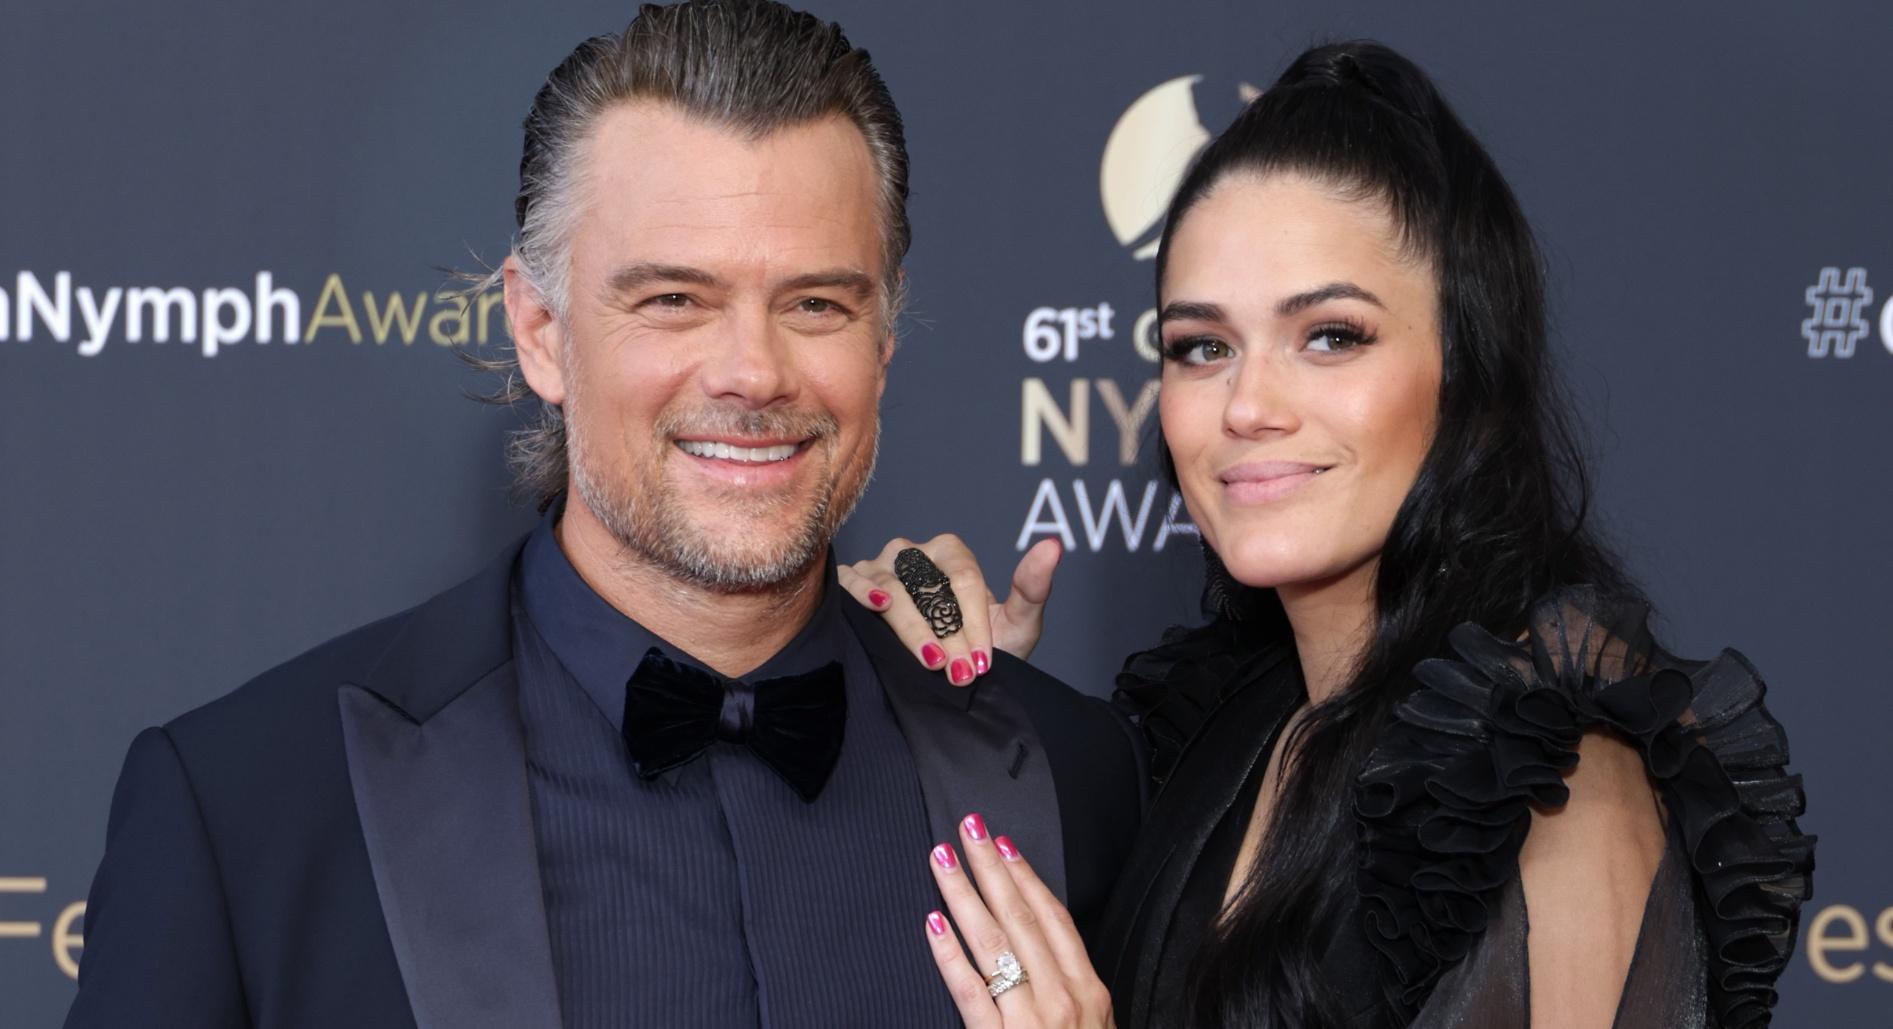 Josh Duhamel and Audra Mari attend the "Nymphes D'Or - Golden Nymphs" Award Ceremony